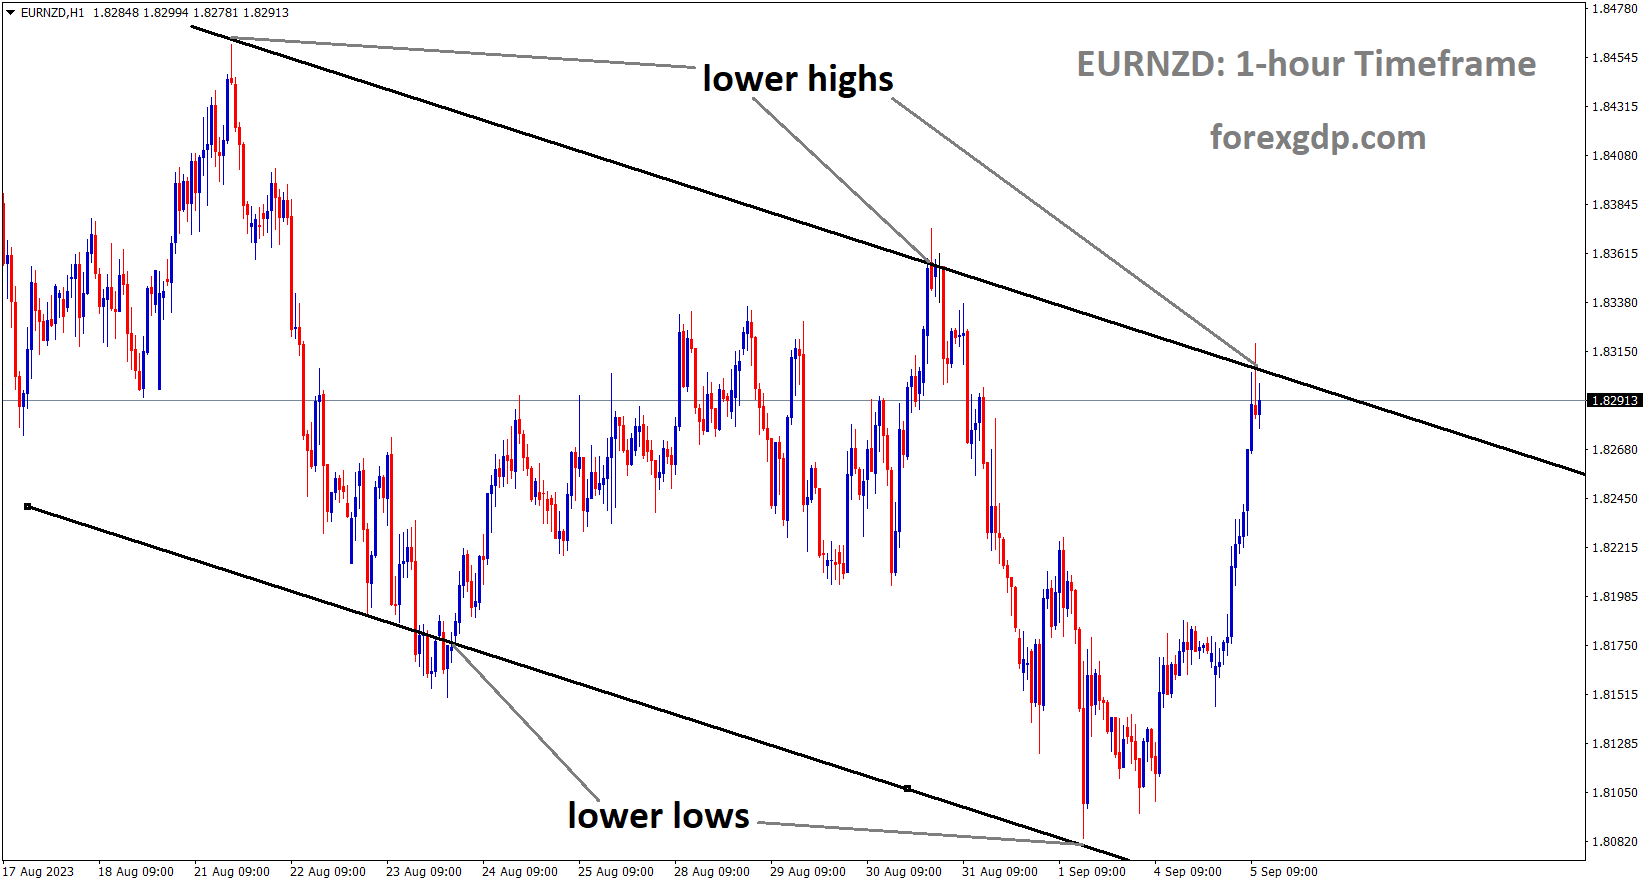 EURNZD is moving in the Descending channel and the market has reached the lower high area of the channel